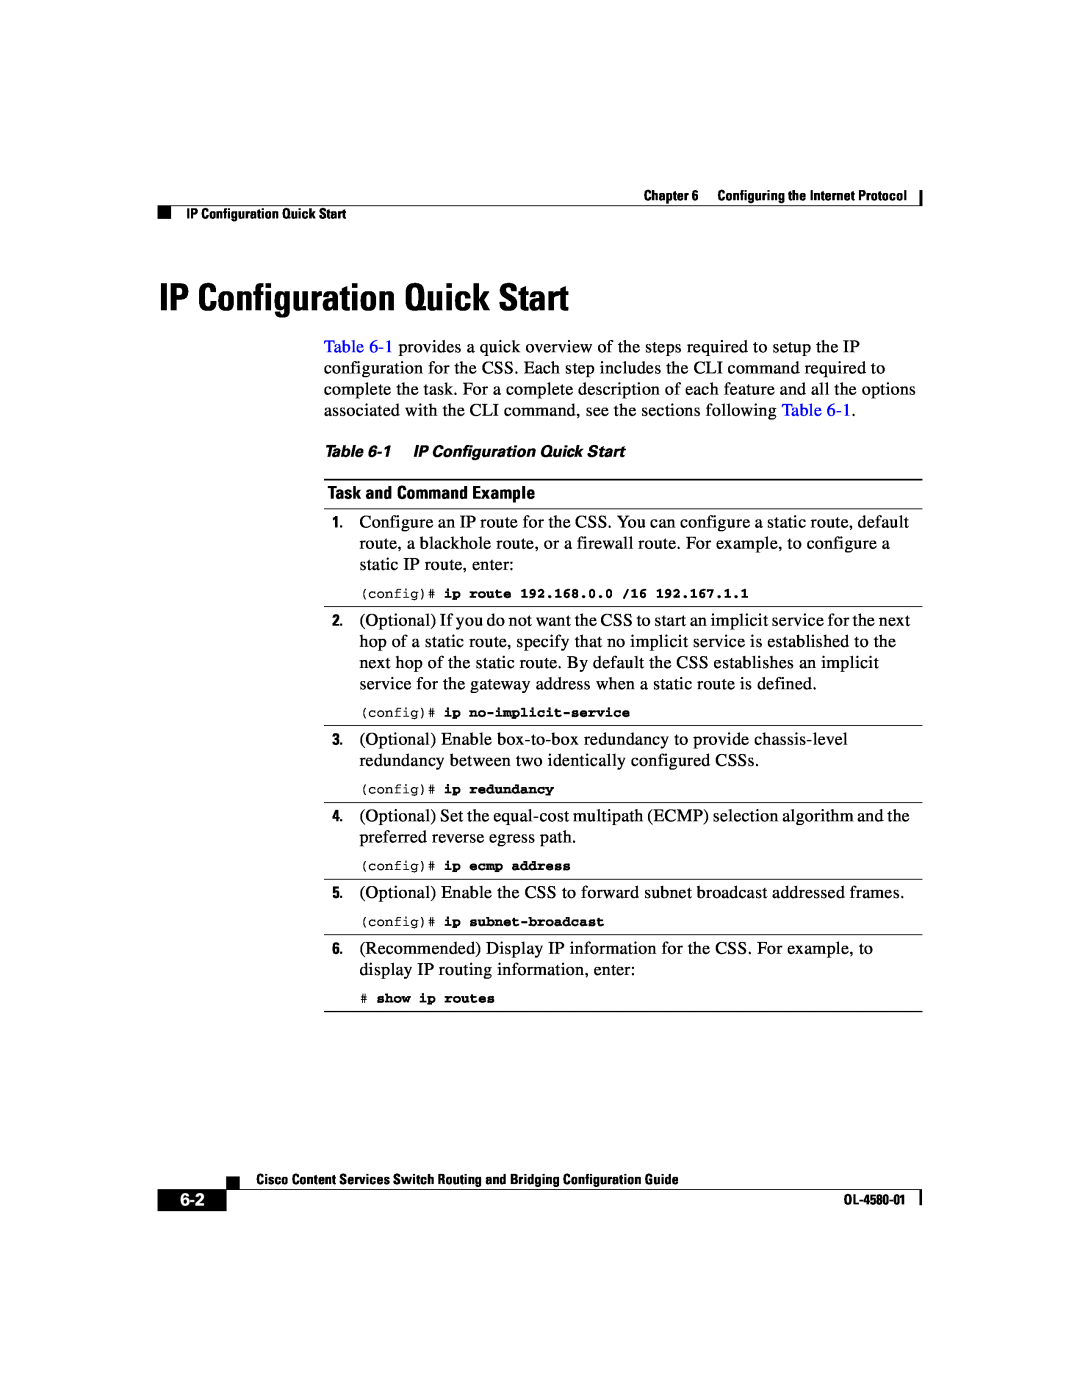 Cisco Systems OL-4580-01 manual Task and Command Example, 1 IP Configuration Quick Start 